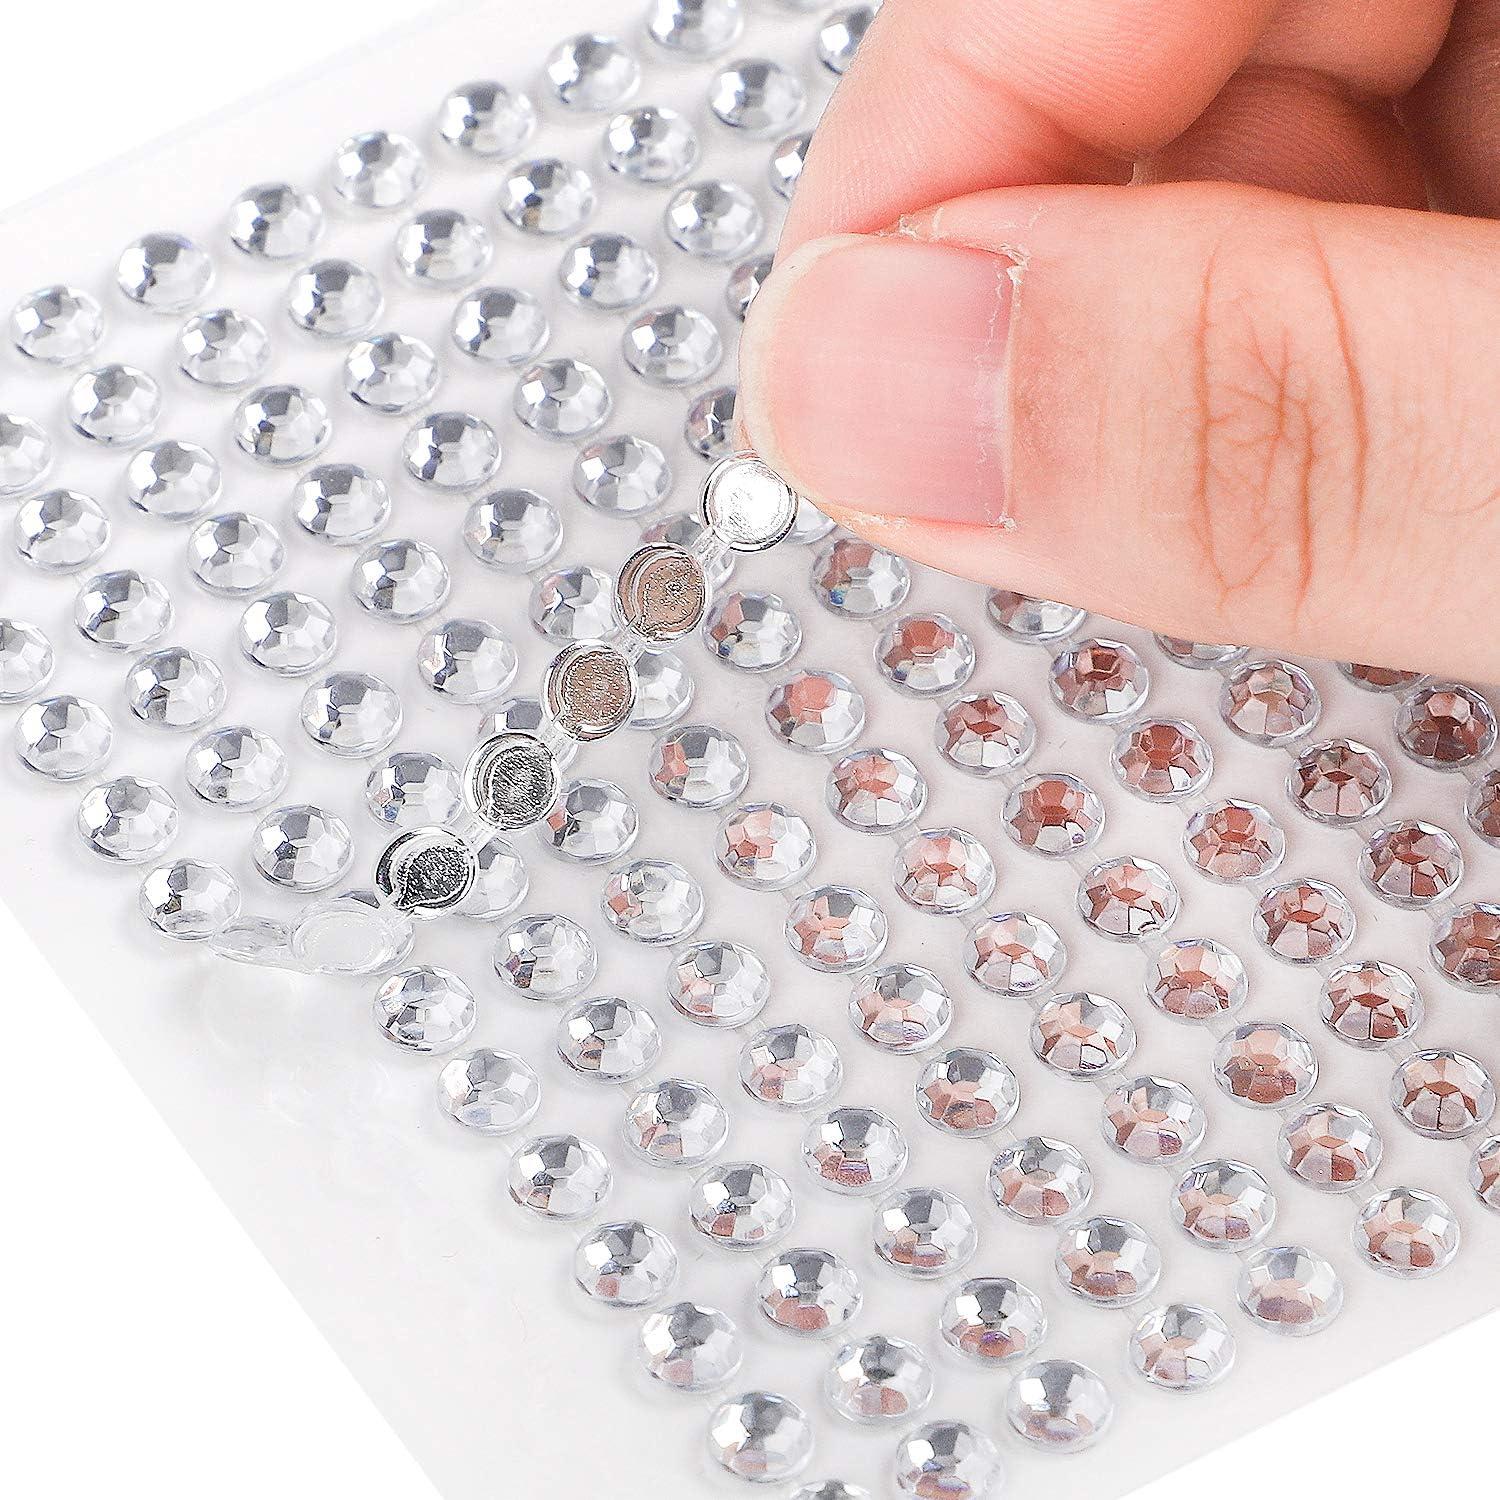 OUTUXED 1725pcs Clear Rhinestones Stickers Self Adhesive Bling